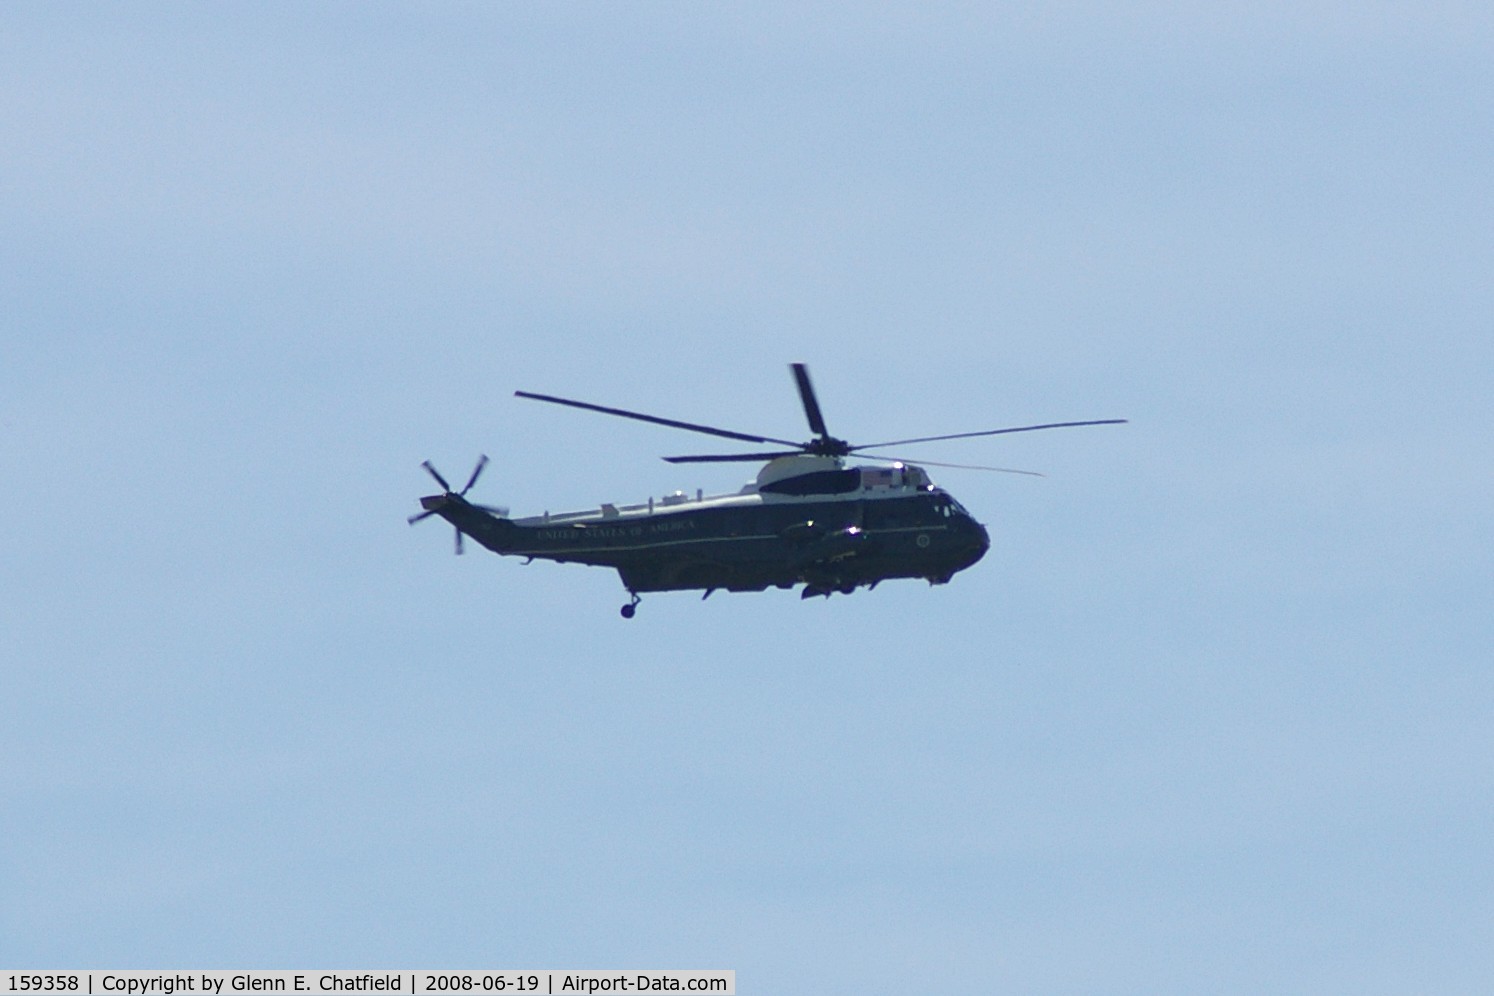 159358, Sikorsky VH-3D Sea King C/N 61732, Either 159358 or 159359.  One is Marine One.  Over North Liberty, IA, about a mile from me.